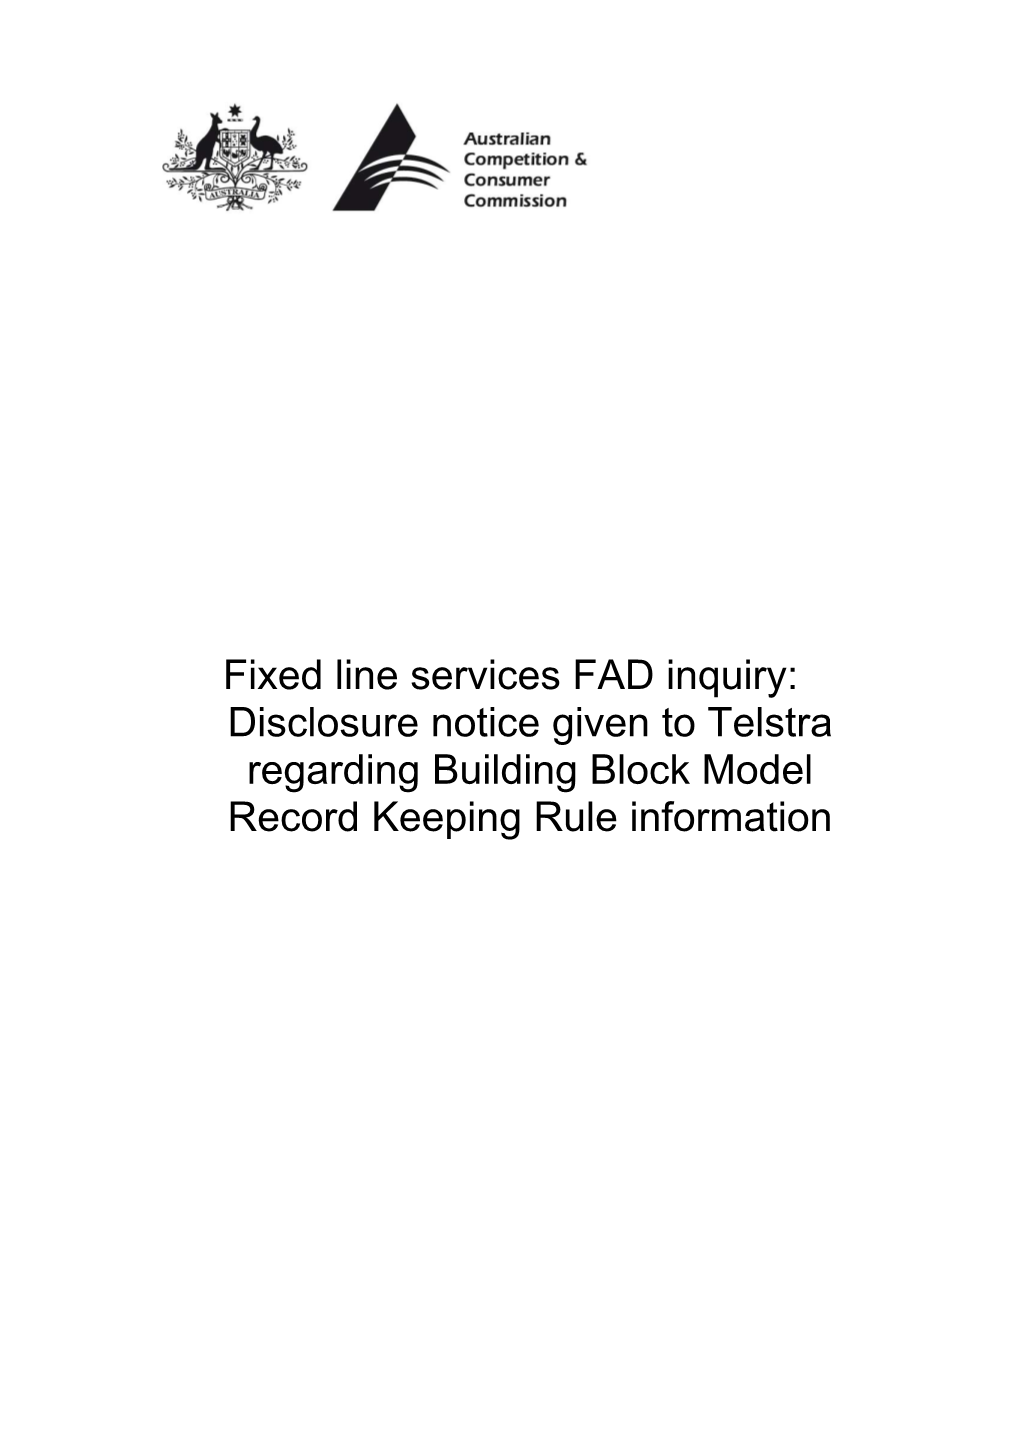 Fixed Line Services FAD Inquiry: Disclosure Notice Given to Telstra Regarding Building